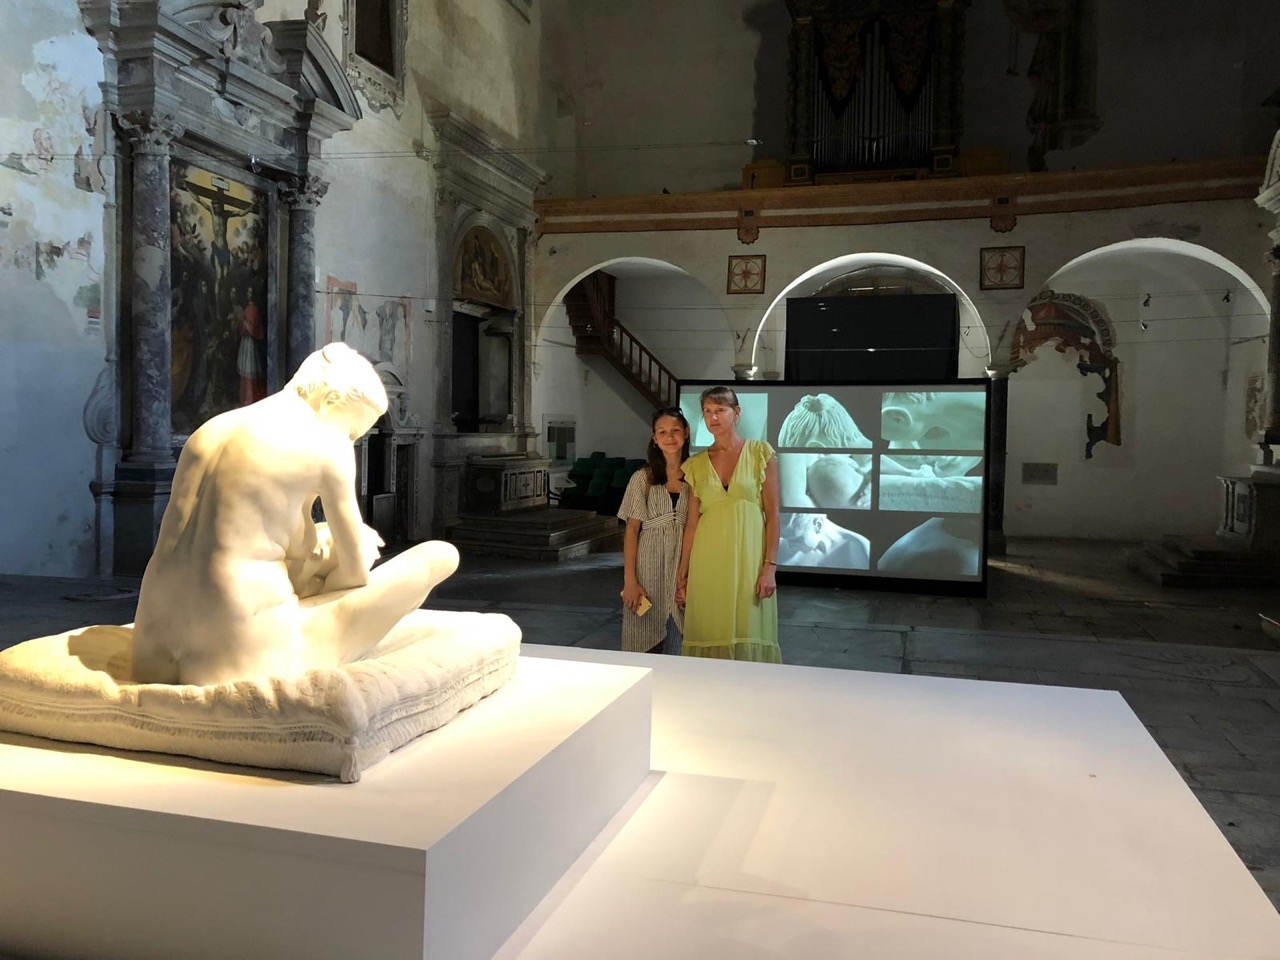 Coco and Emily visit the exhibition in the ancient cathedral in Pietrasanta